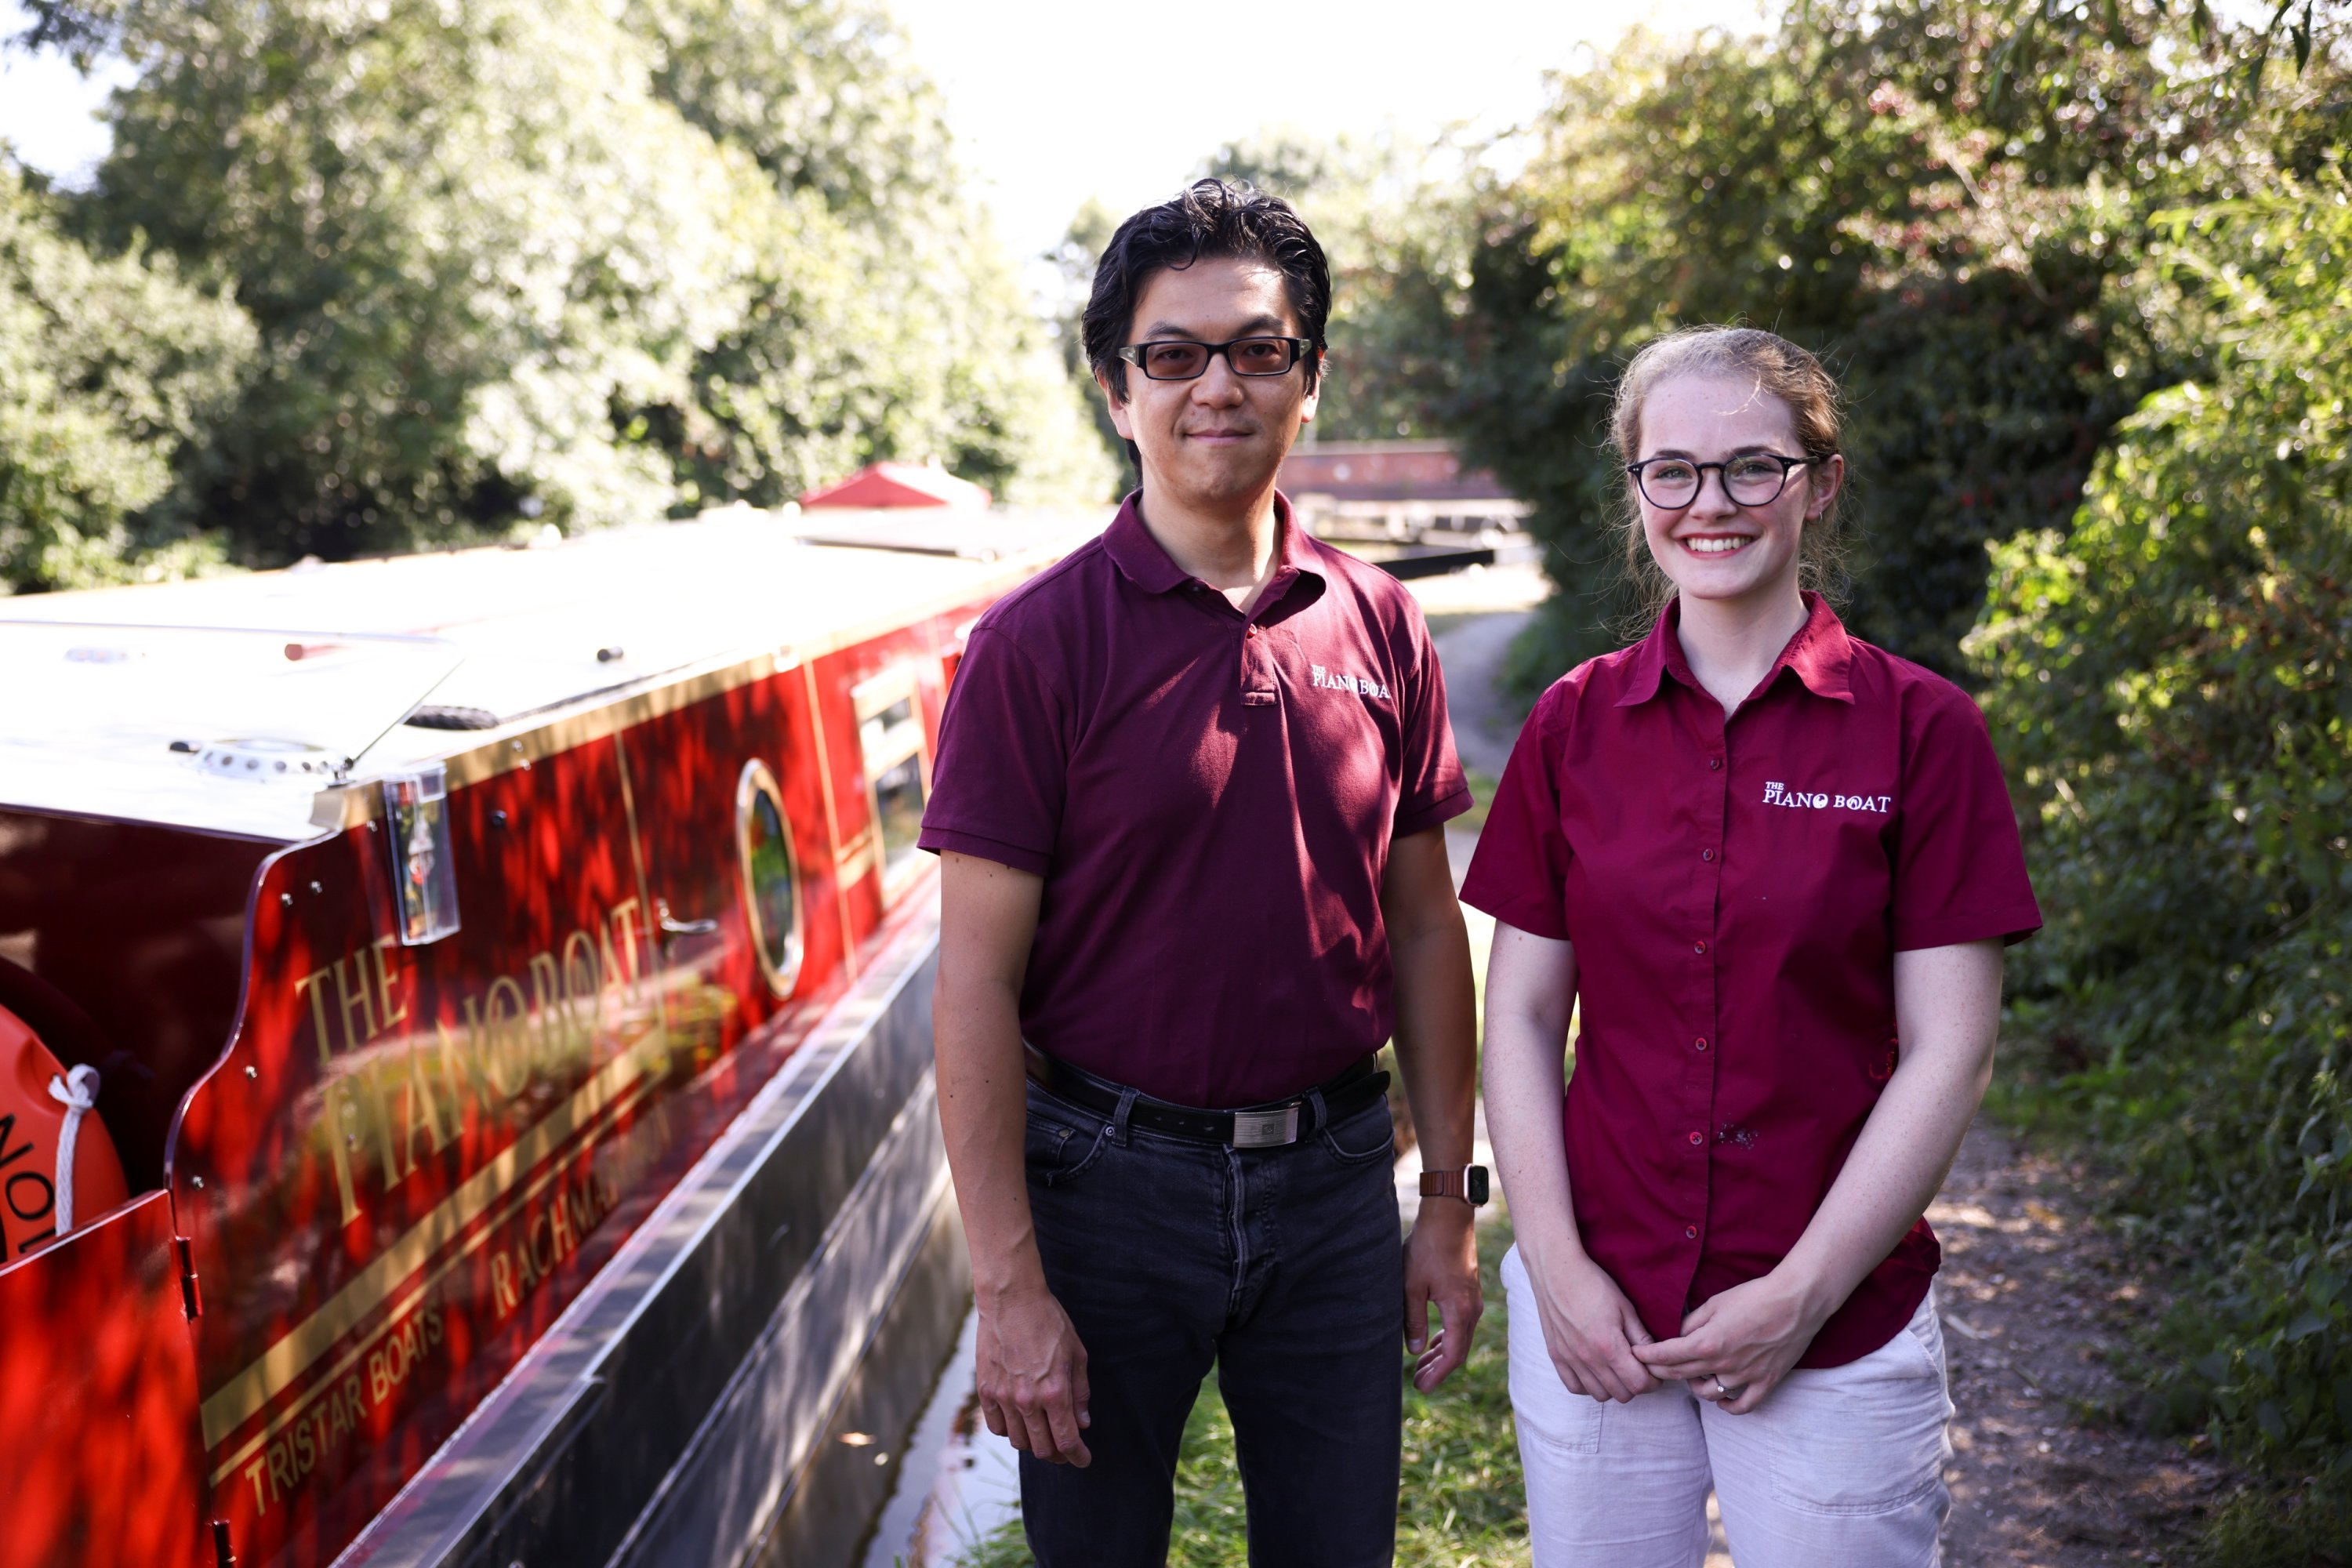 Pianists Masayuki Tayama and Rhiana Henderson stand next to their canal boat concert hall, named The Piano Boat, in Harefield, Britain, Sept. 8, 2021. (Reuters Photo)